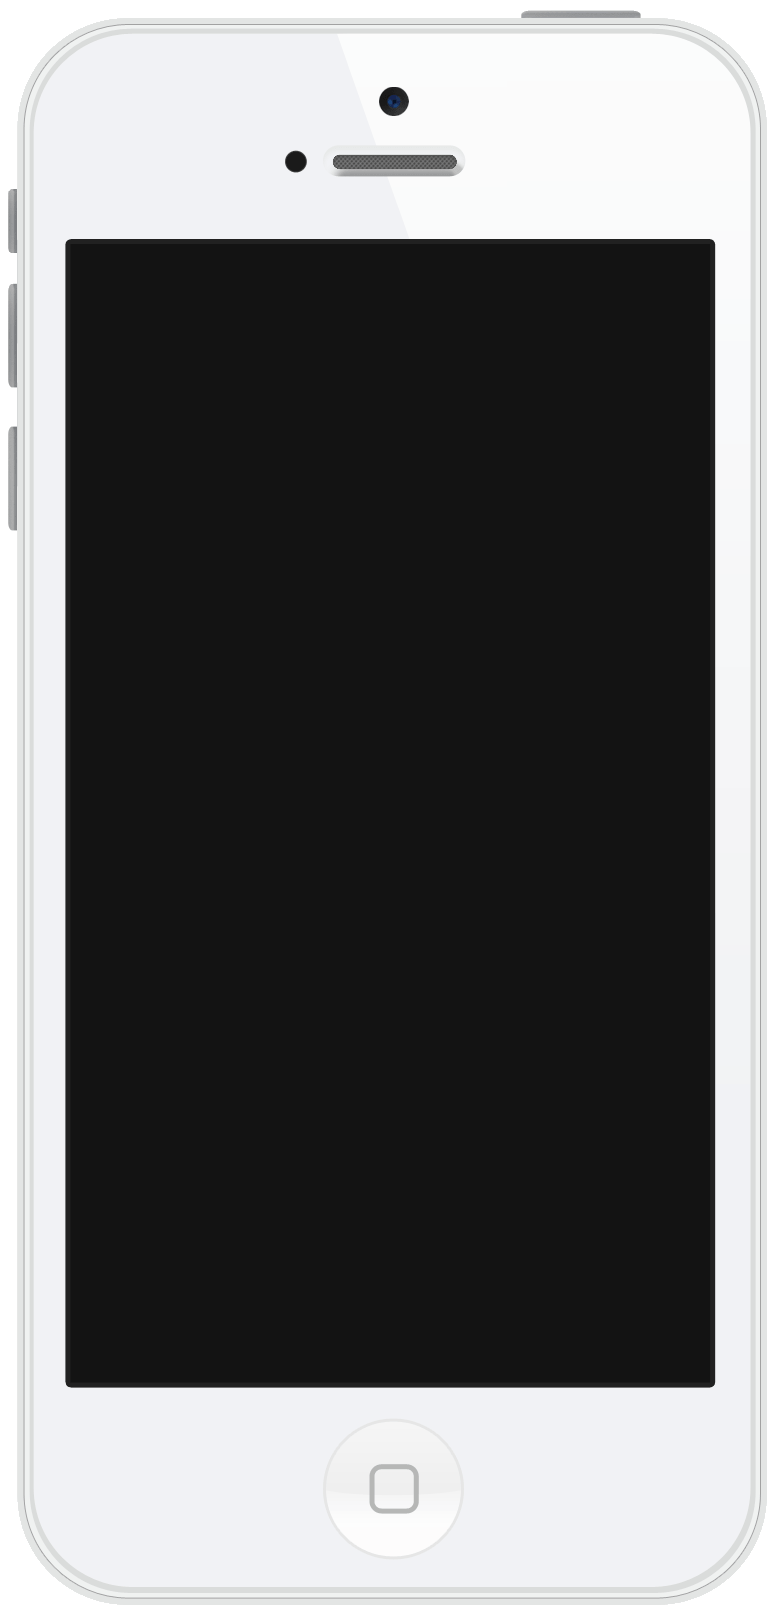 Apple Iphone Png Image PNG Image